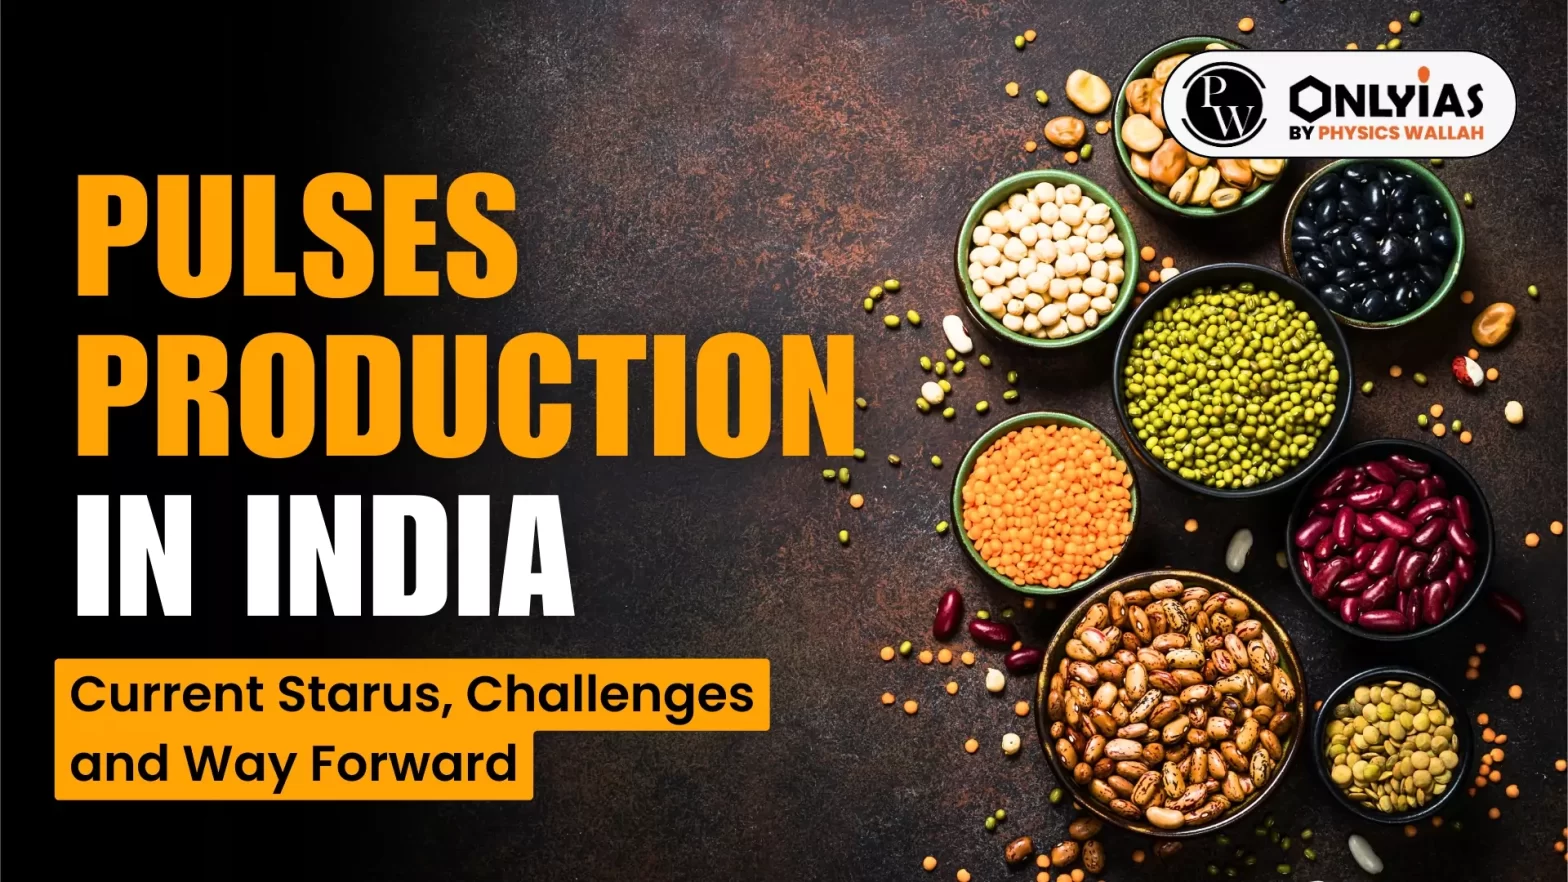 Pulses Production in India: Current Starus, Challenges and Way Forward